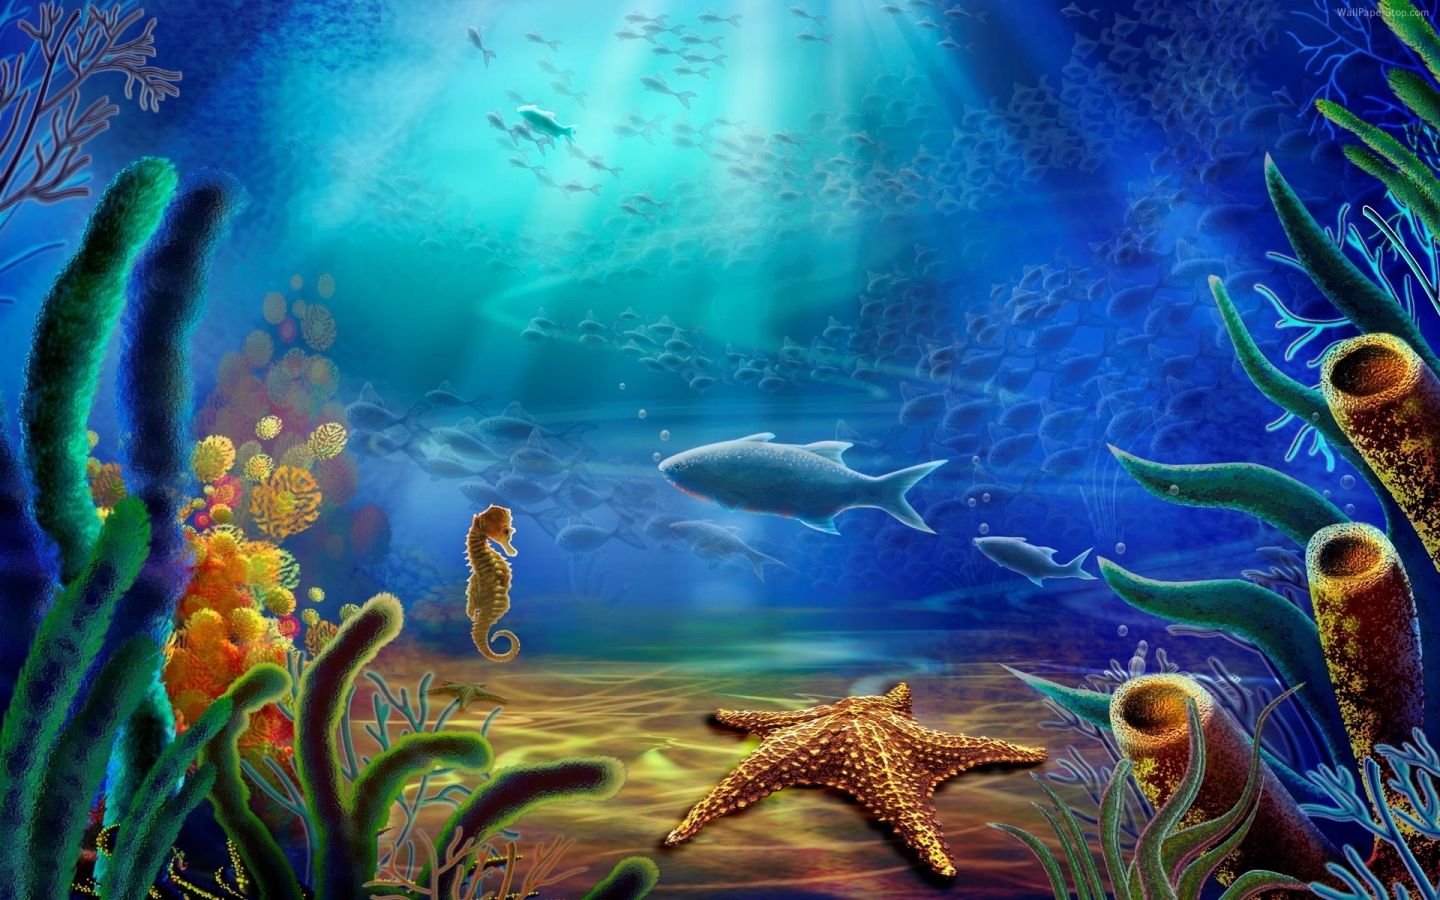 Under Water 3D View for 1440 x 900 widescreen resolution